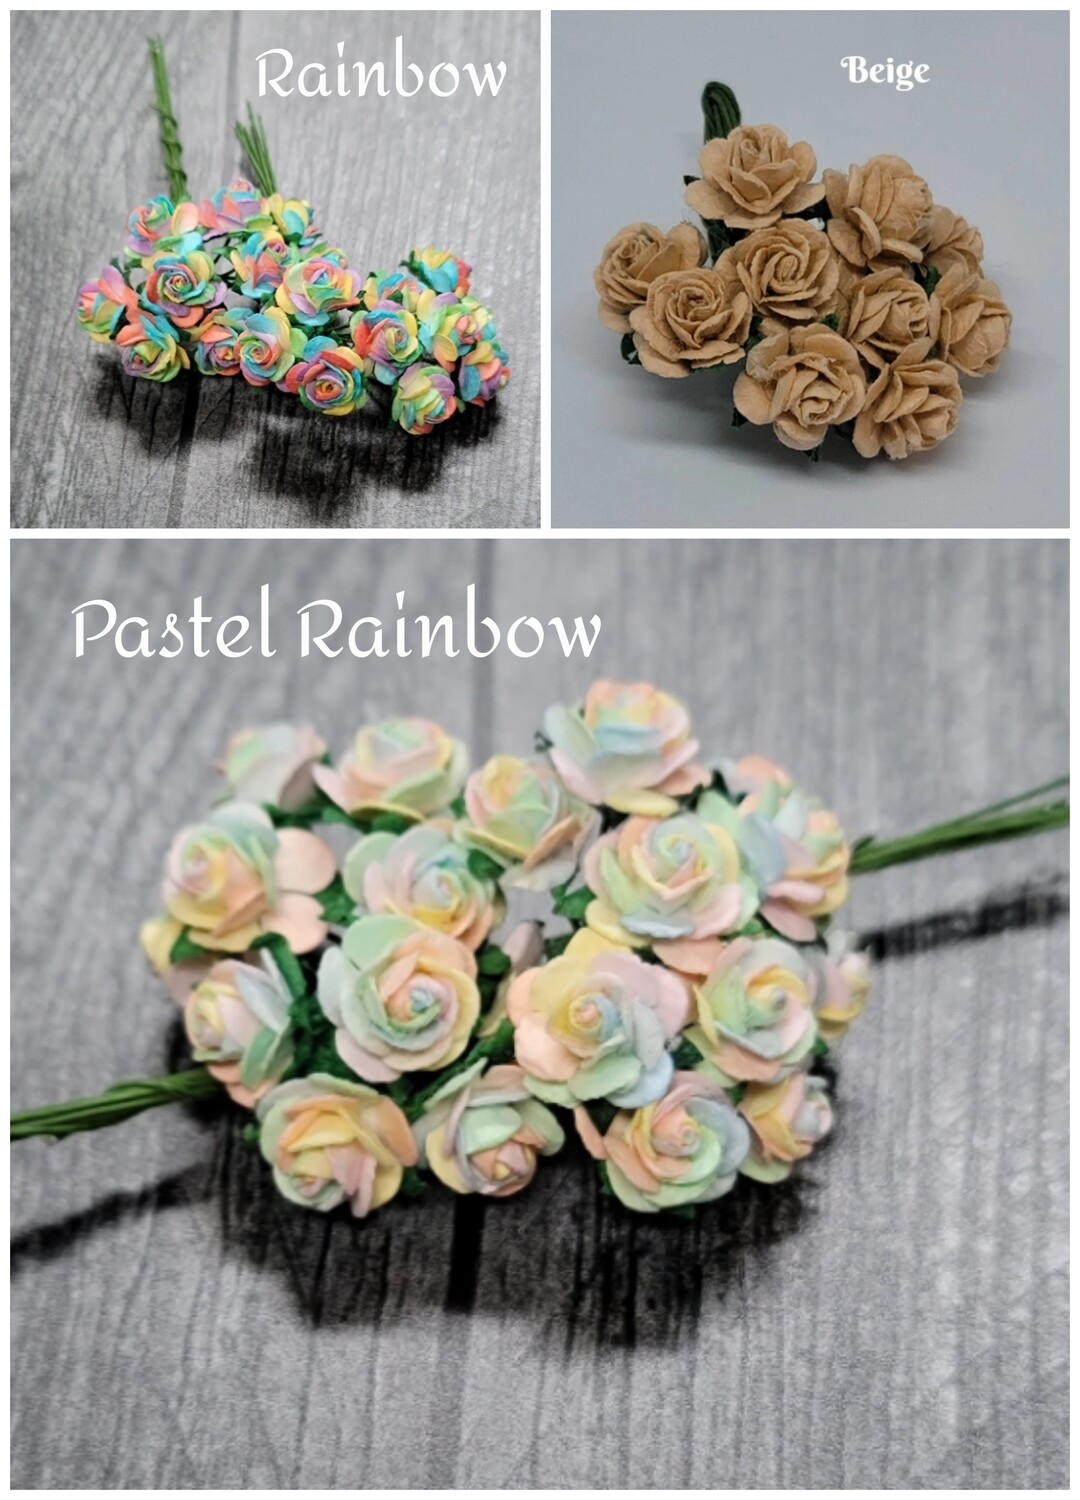 10mm Open Roses Color Set 7 - Promlee Flowers